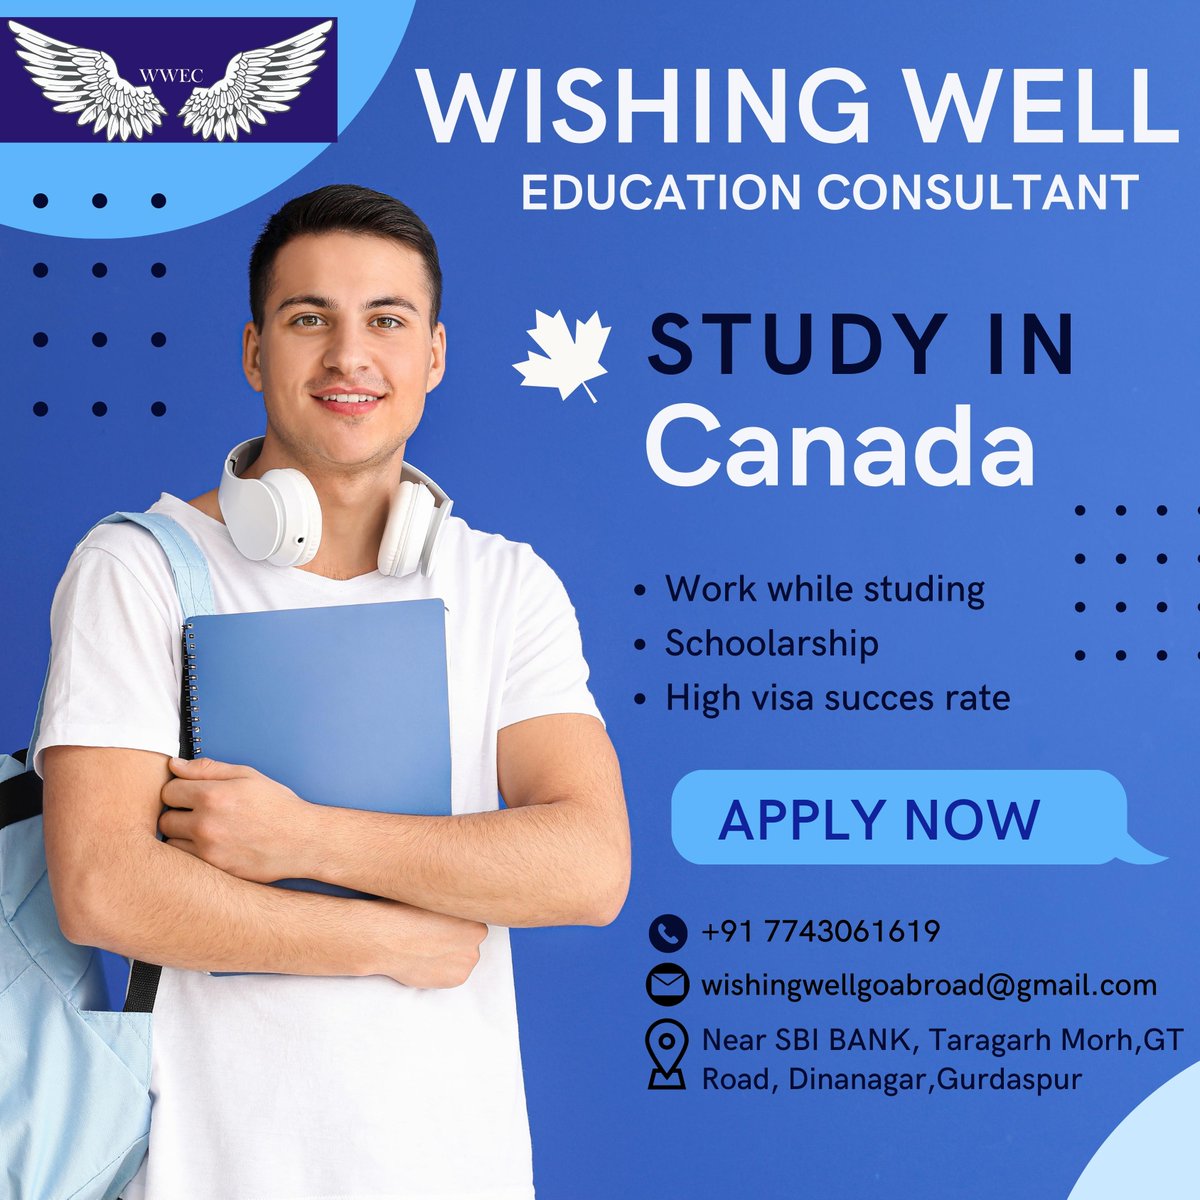 “The world is full of possibilities, and we’ll help you explore them”. We are providing travel visa and student visa. Contact us: +917743061619, Gmail: wishingwellgoabroad@gmail.com
#wwec #wishingwell #educationconsultant #immigration #visitorvisa #usvisa #immigrationlawyers